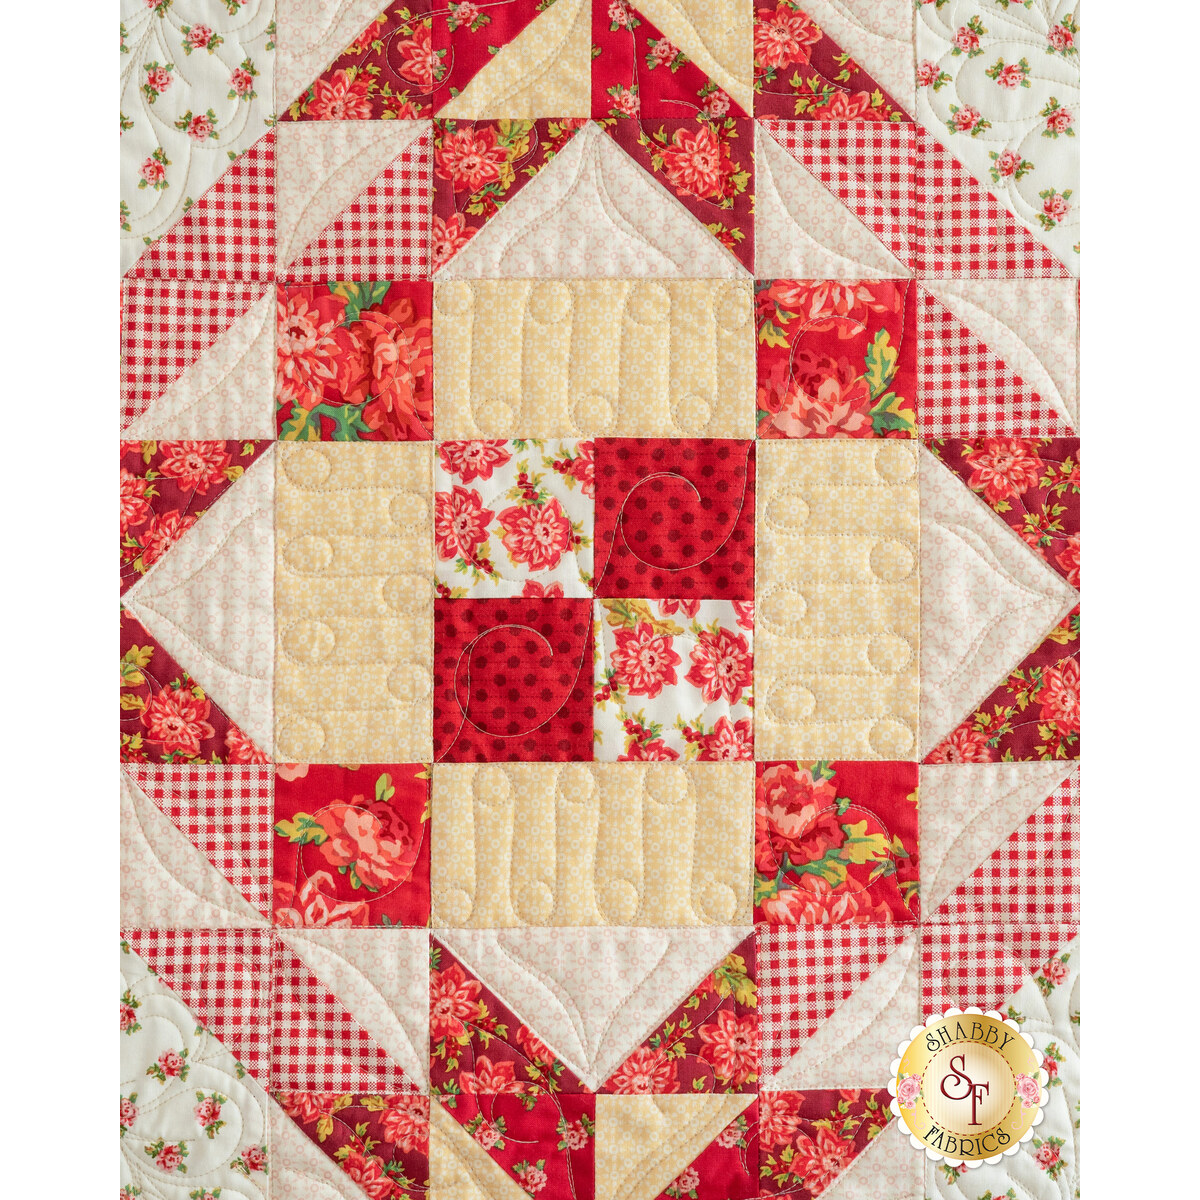 Blank Quilting Joy of Color Raspberry Geometric Squares Fabric